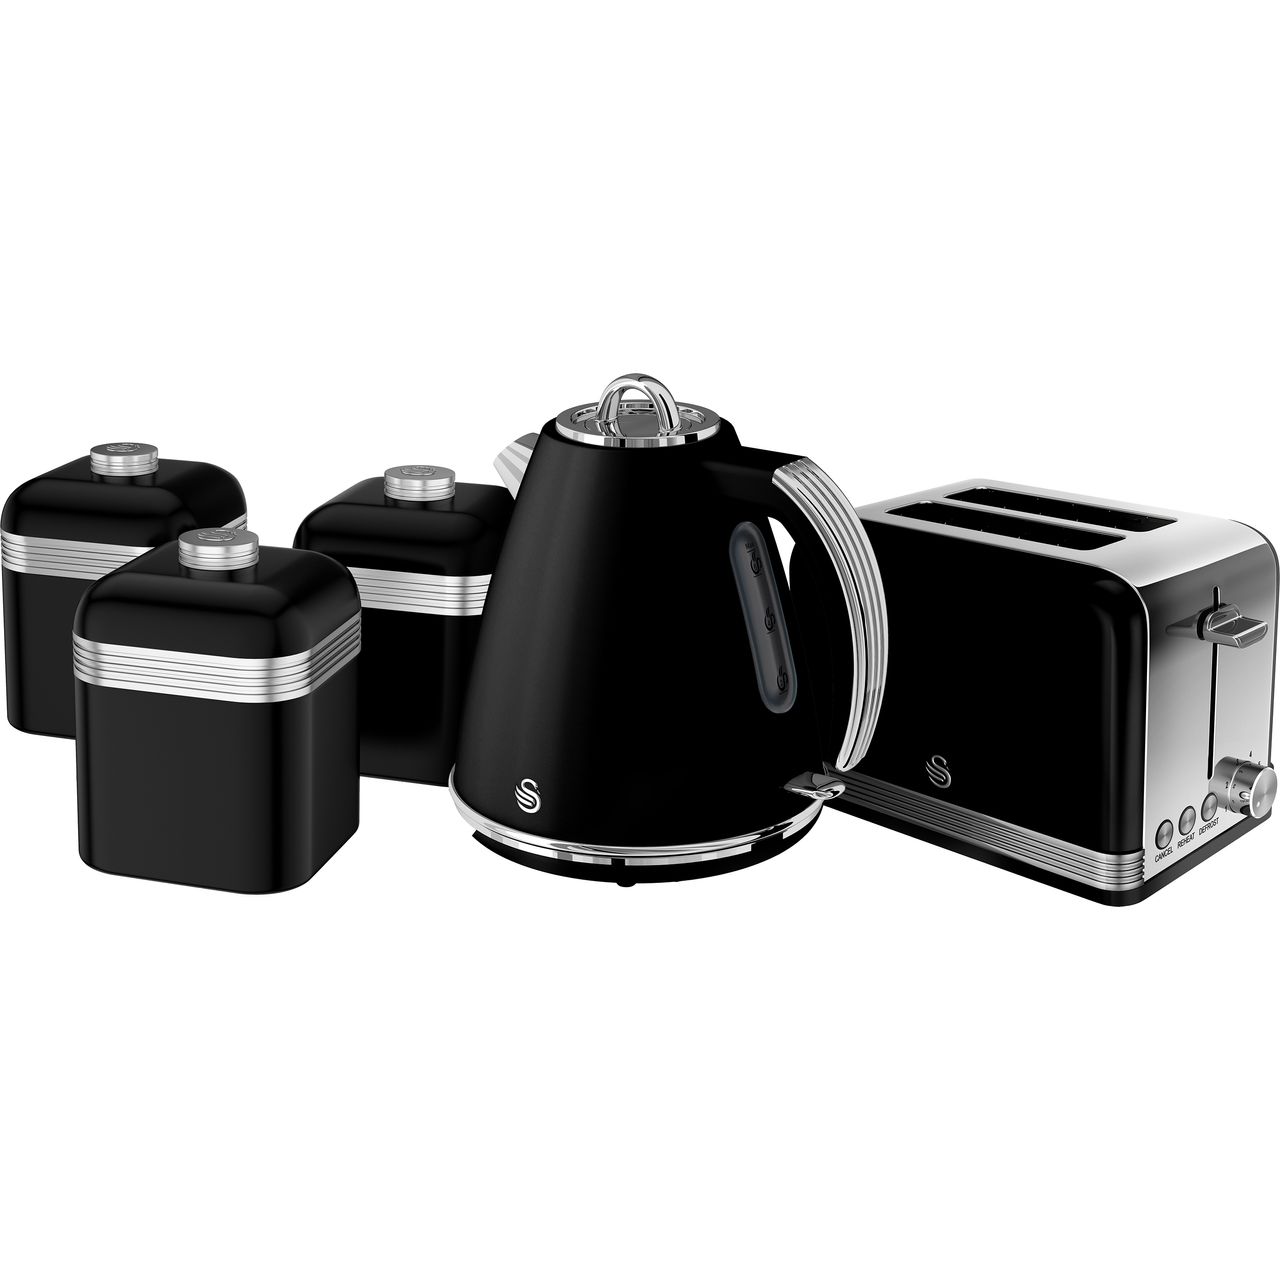 Swan Retro STRP3022BN Kettle And Toaster Sets Review